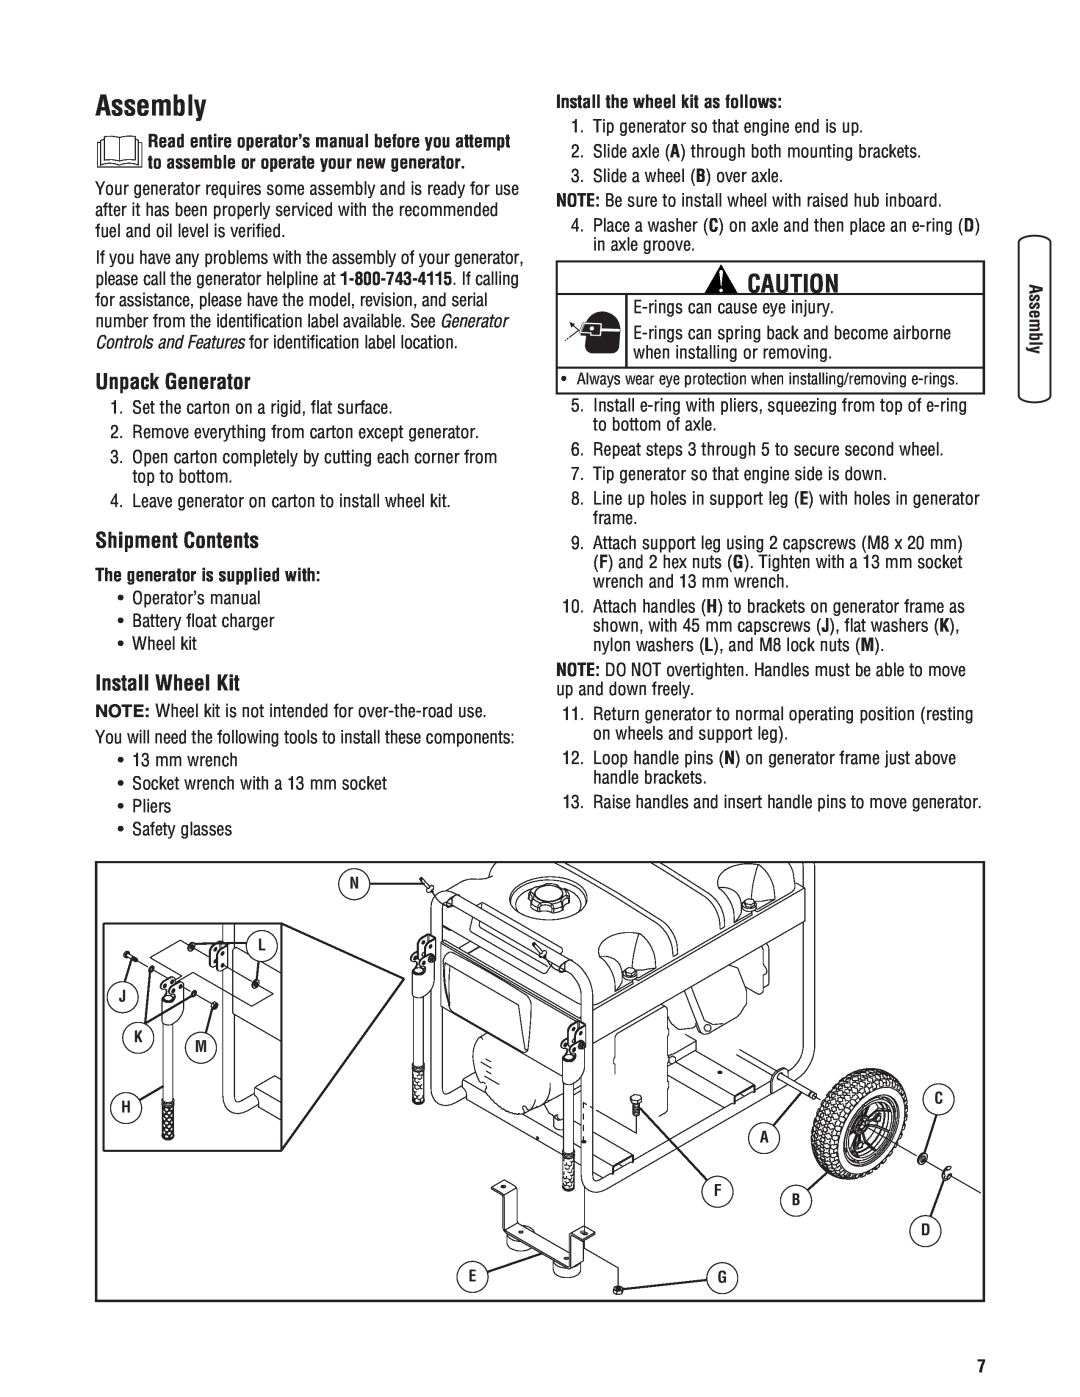 Briggs & Stratton 206405GS manual Assembly, Unpack Generator, Shipment Contents, Install Wheel Kit 